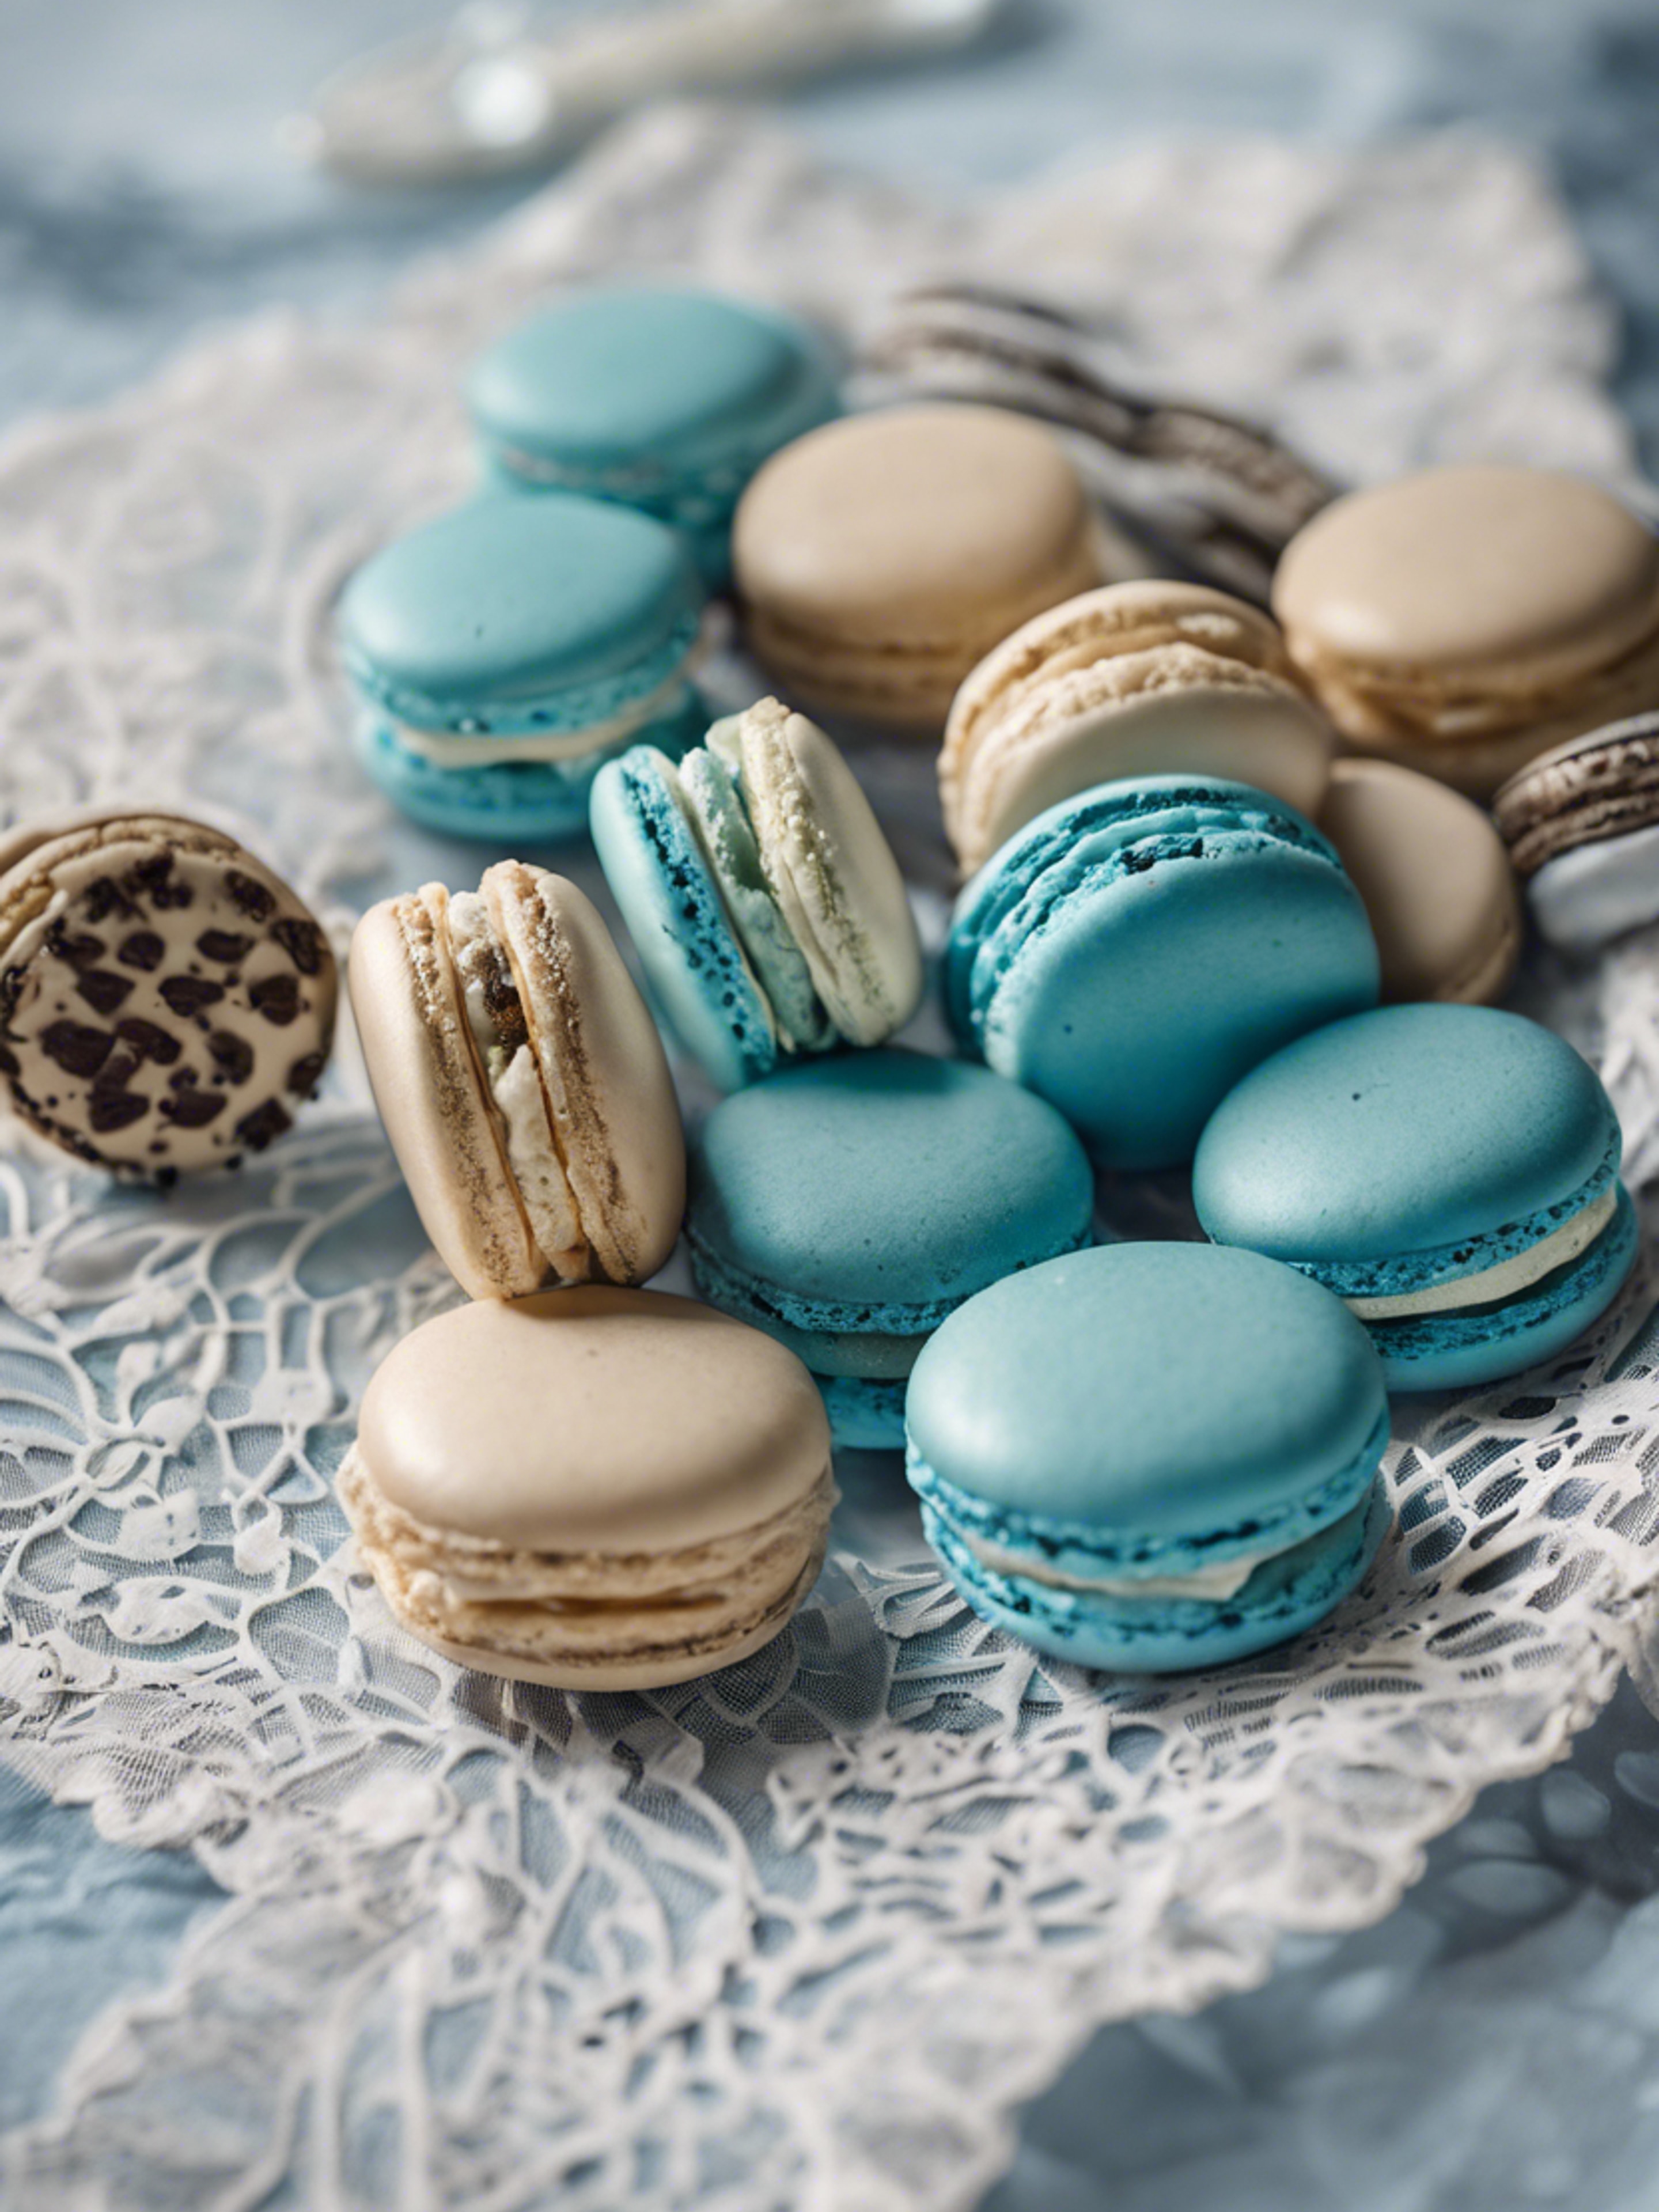 Blue French Macarons artistically arranged on an antique white lace tablecloth. 牆紙[73469cabdbbf44728762]